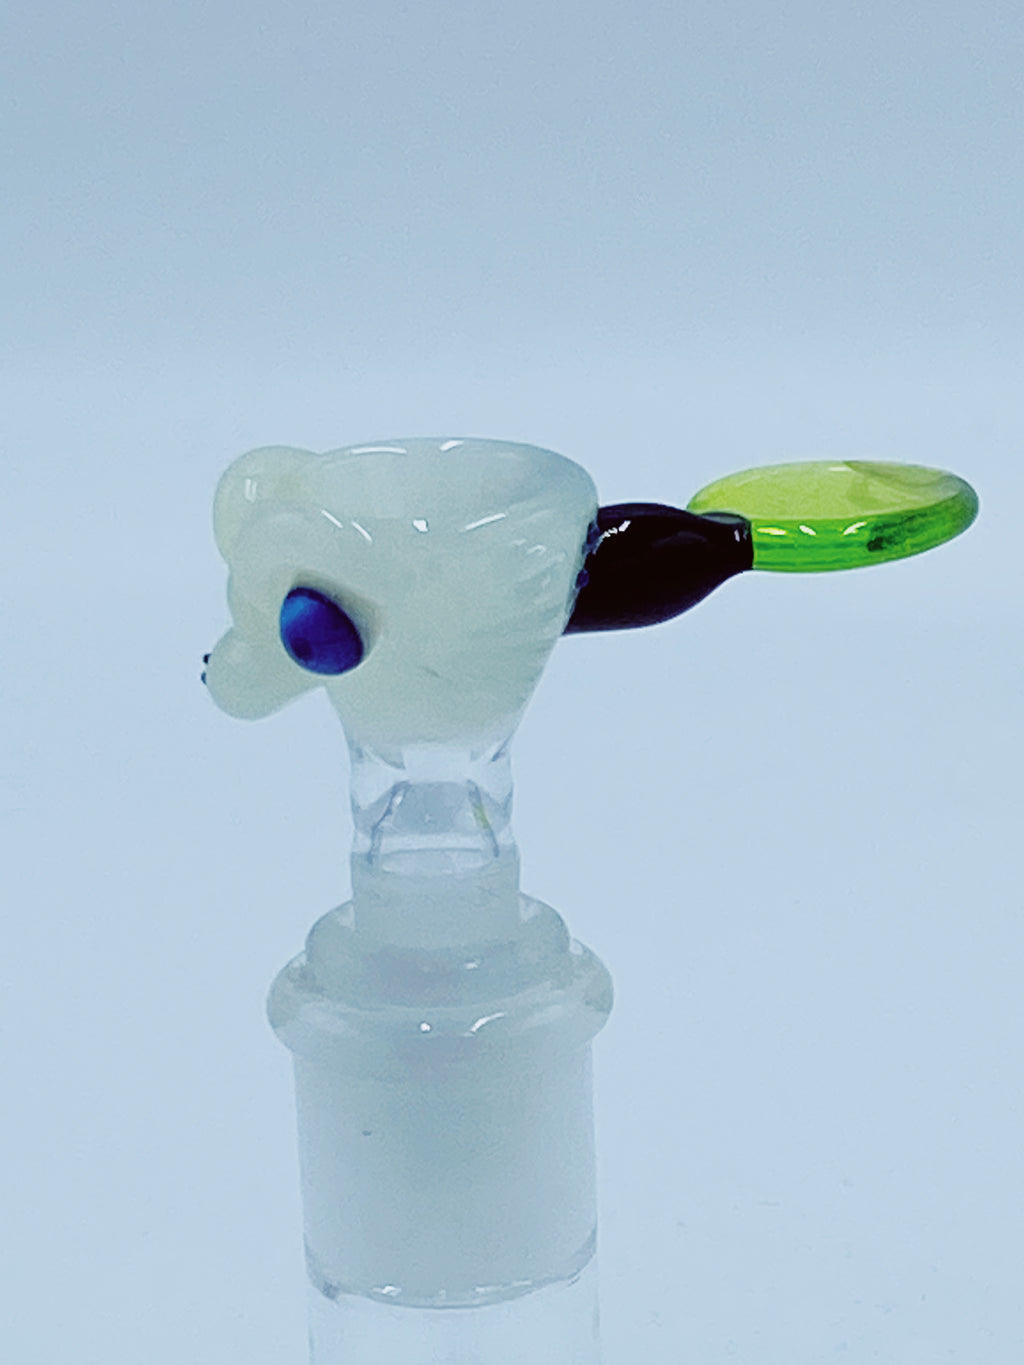 MELT GLASS 14MM FLORESCENT MONSTER BOWL - Smoke Country - Land of the artistic glass blown bongs